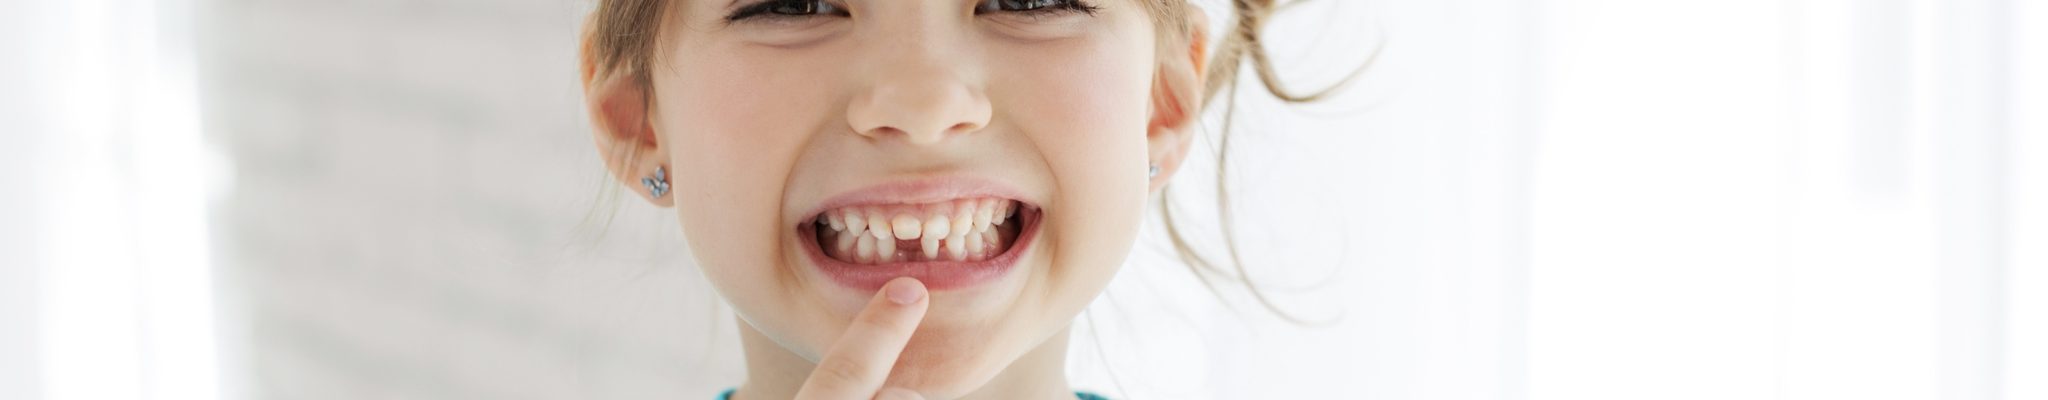 What To Do If a Tooth Falls Out